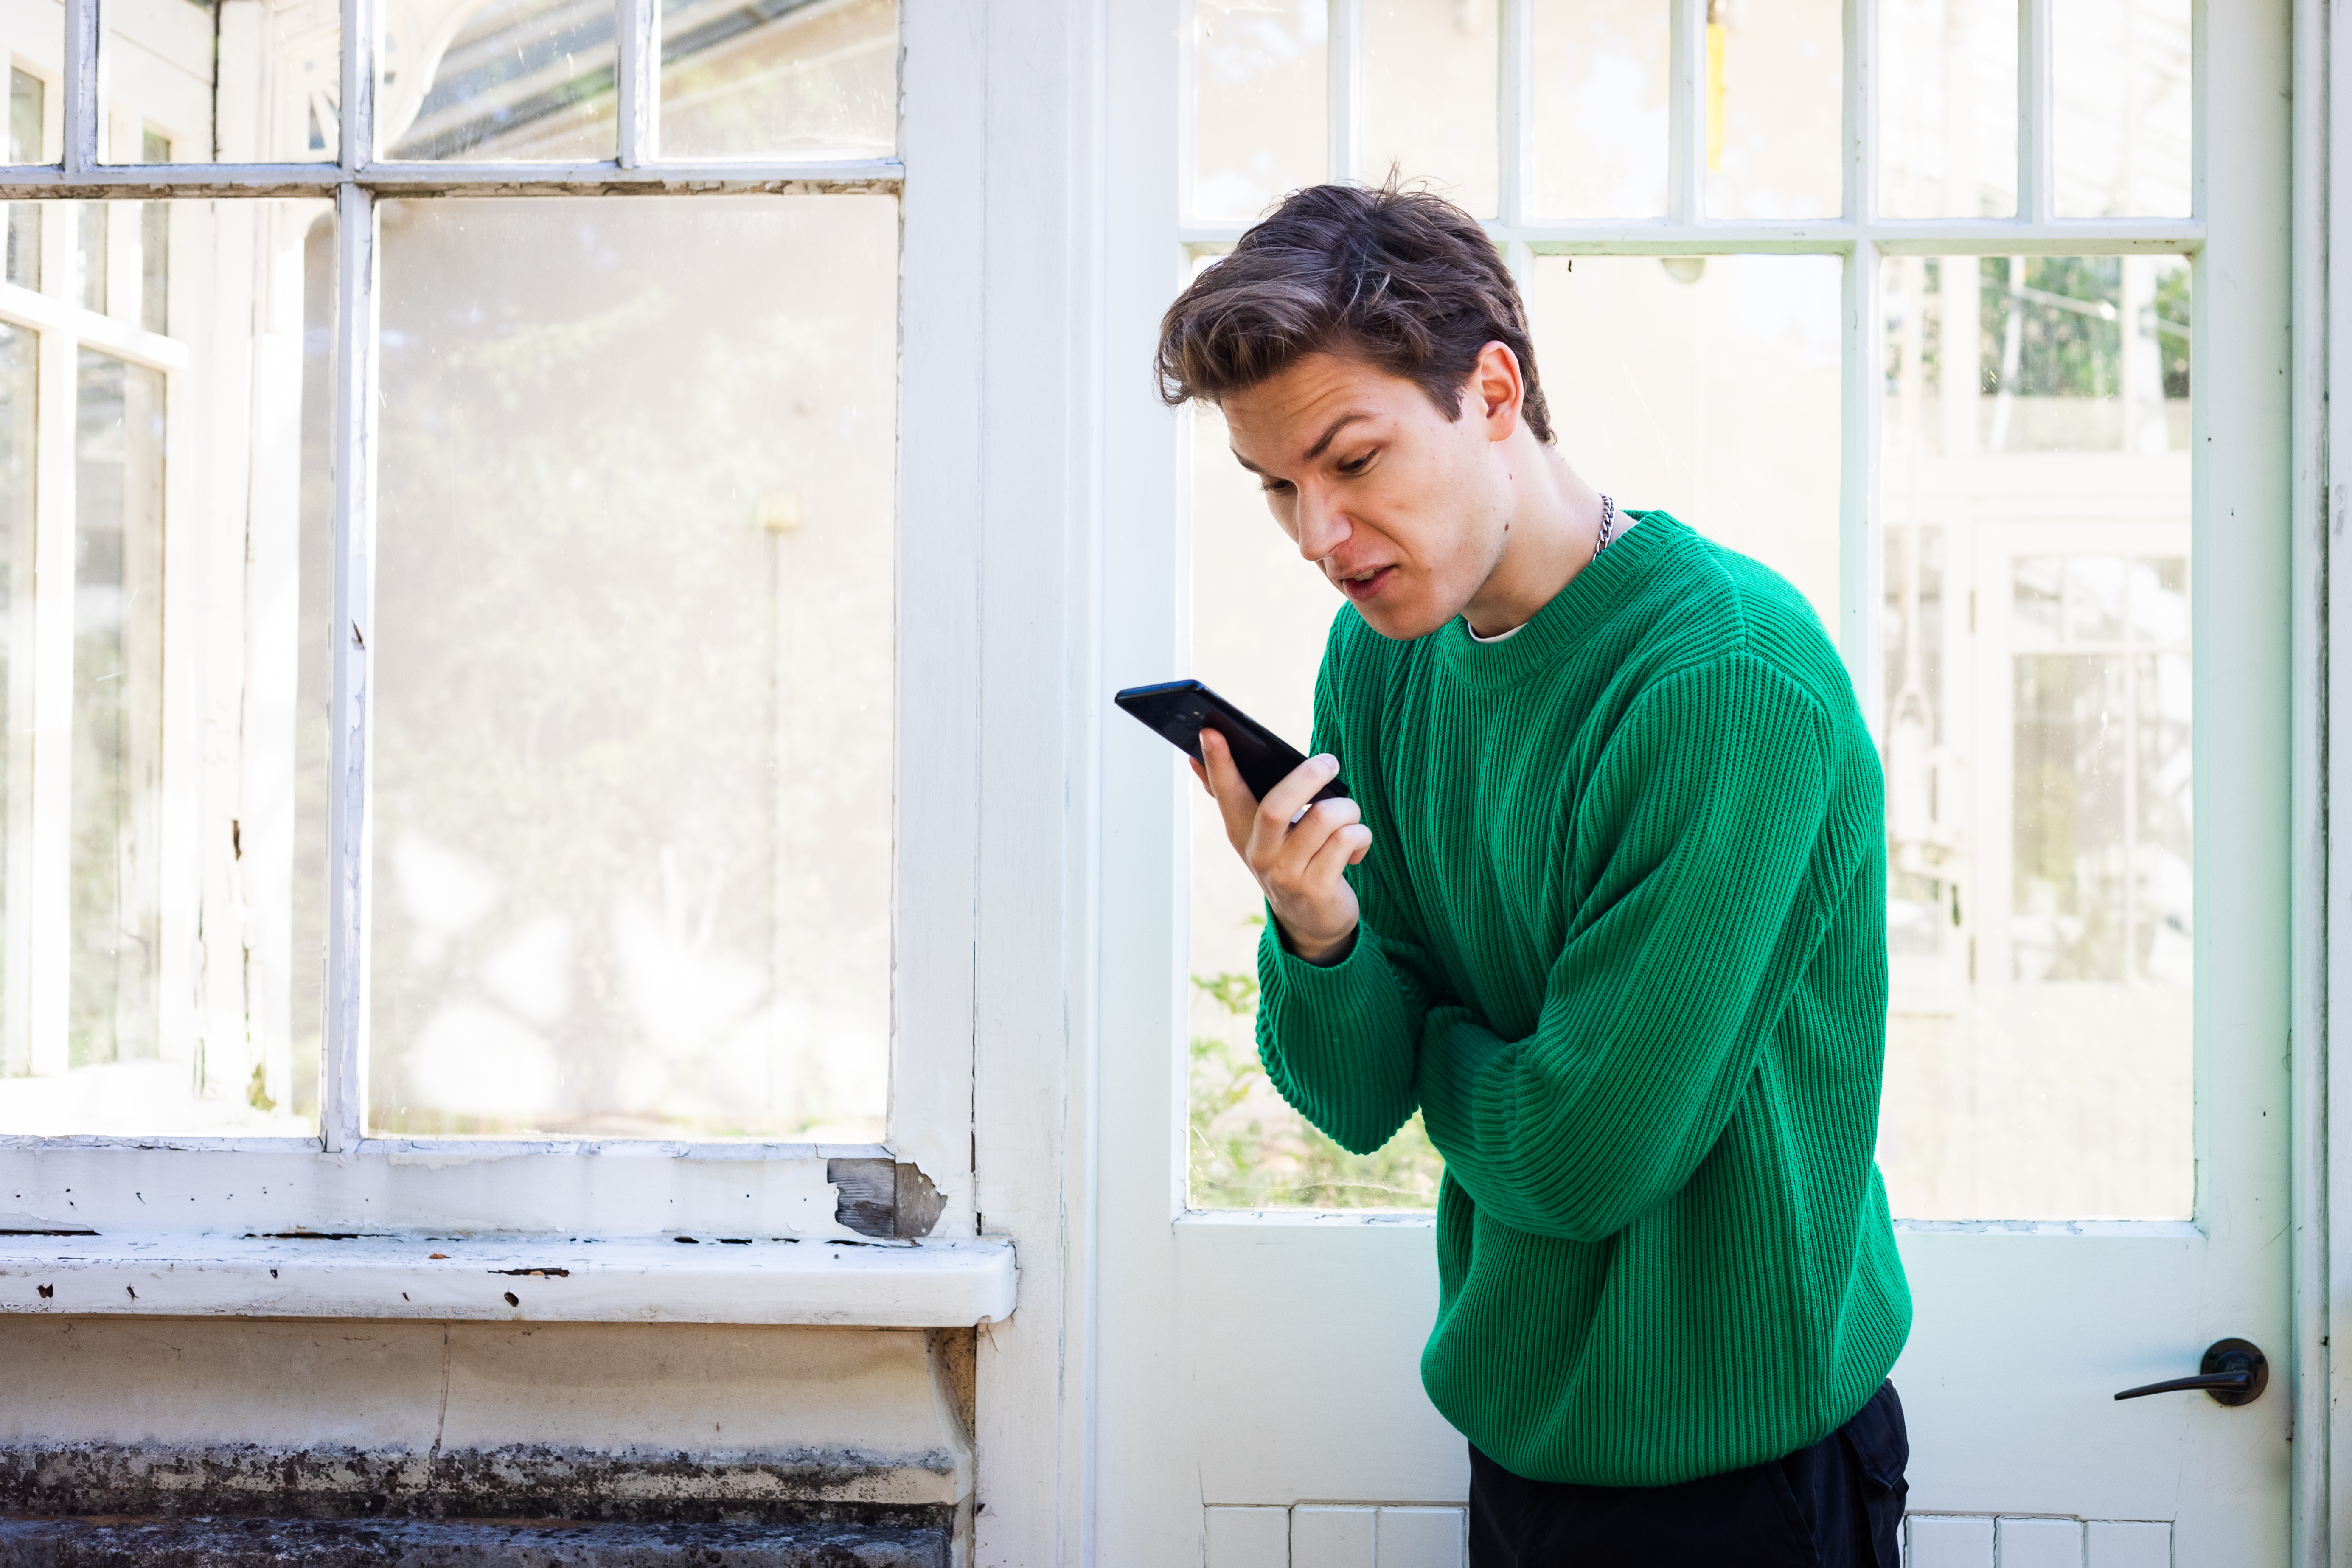 Angry man looking at phone | Source: Shutterstock